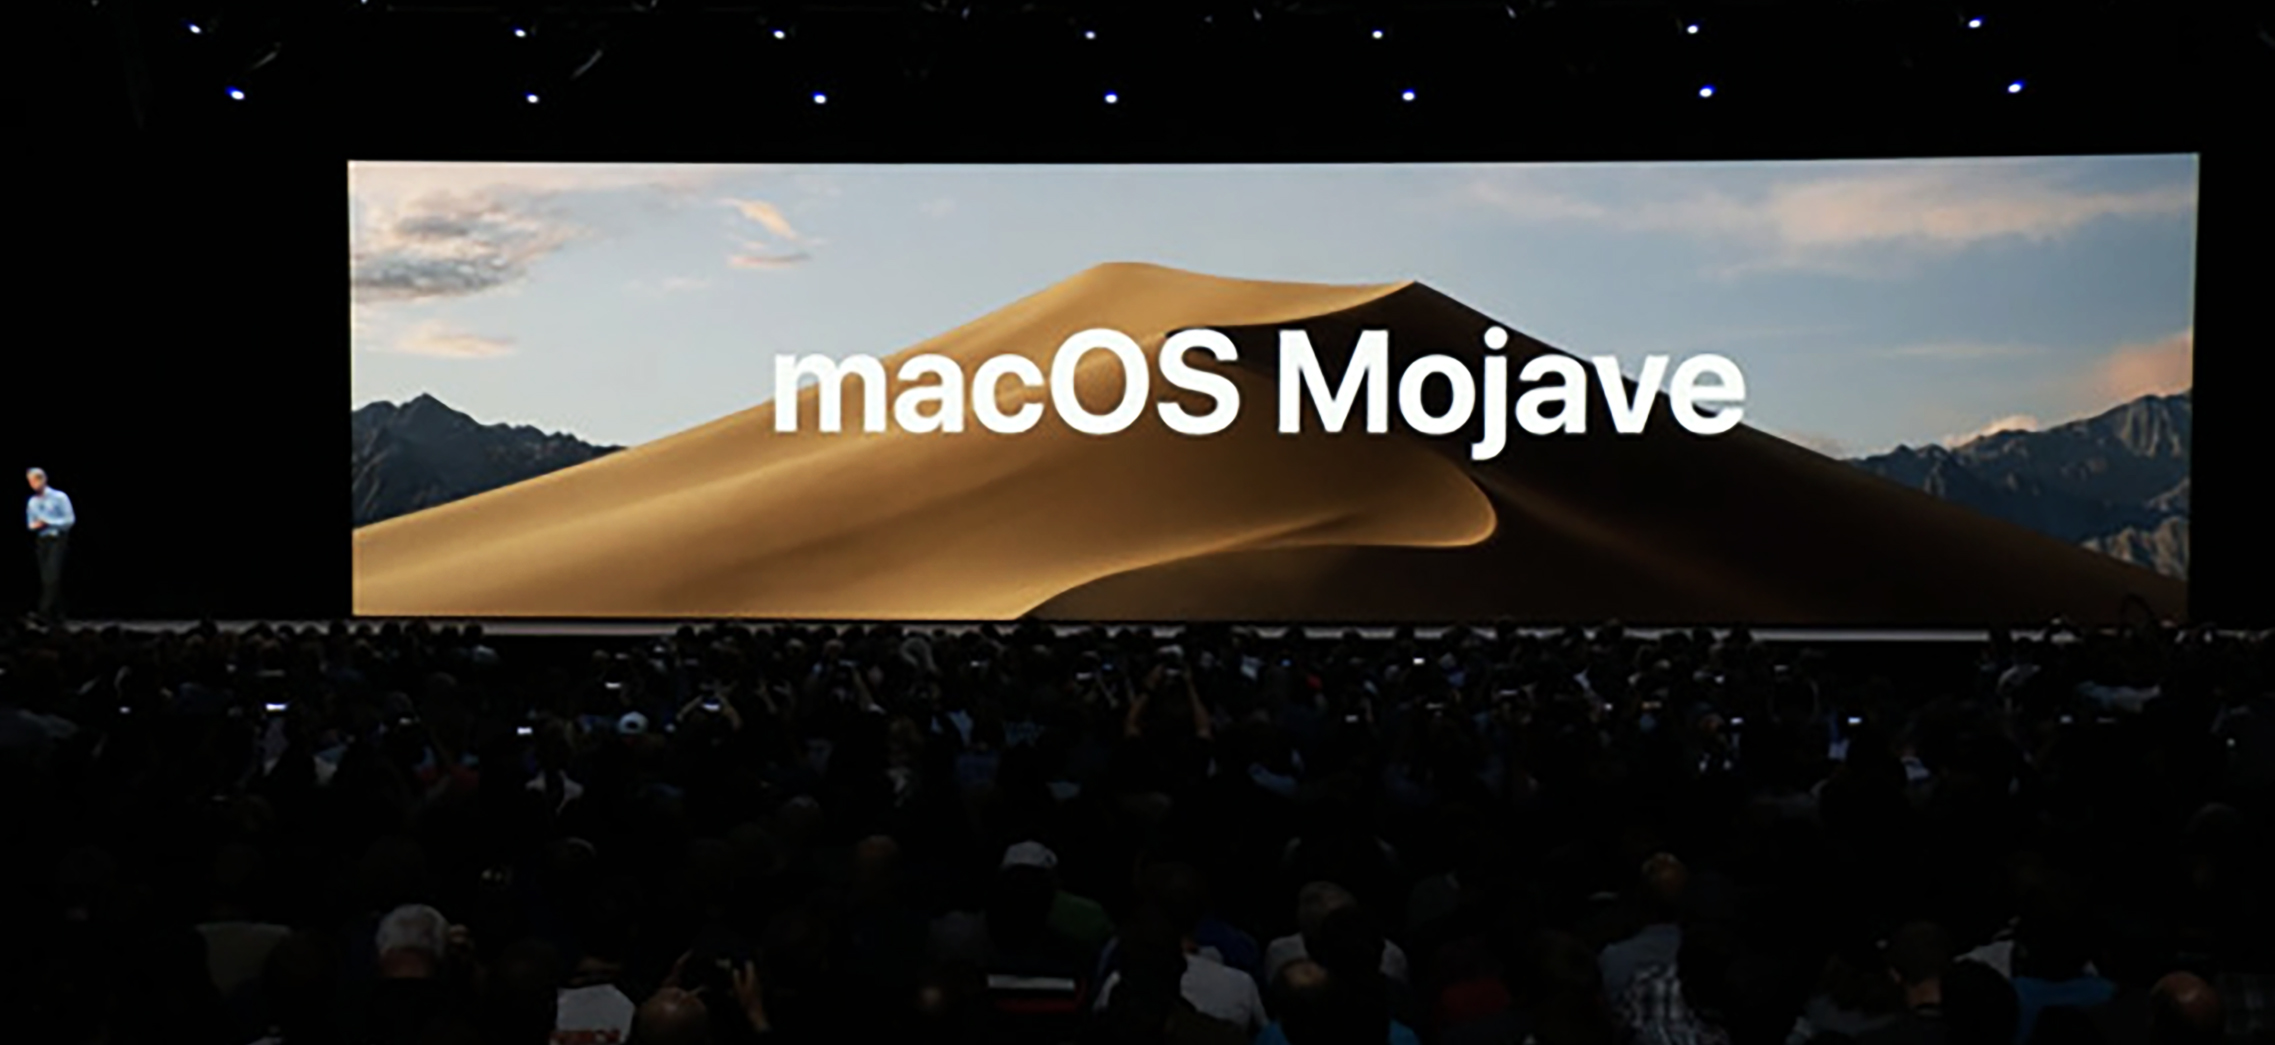 Mojave download the last version for ipod